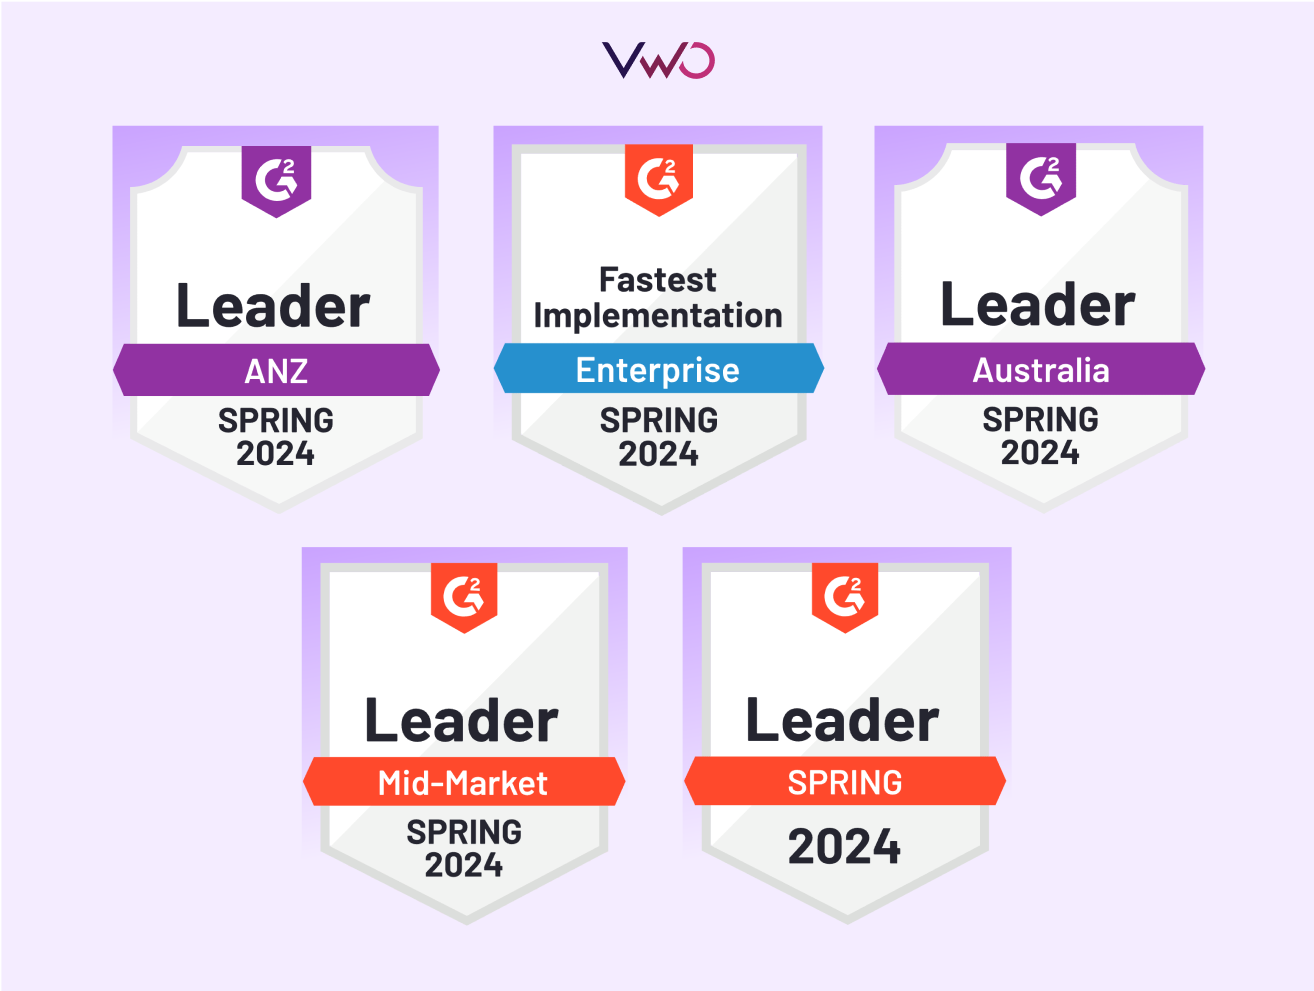 Badges that VWO racked up in the Personalization category